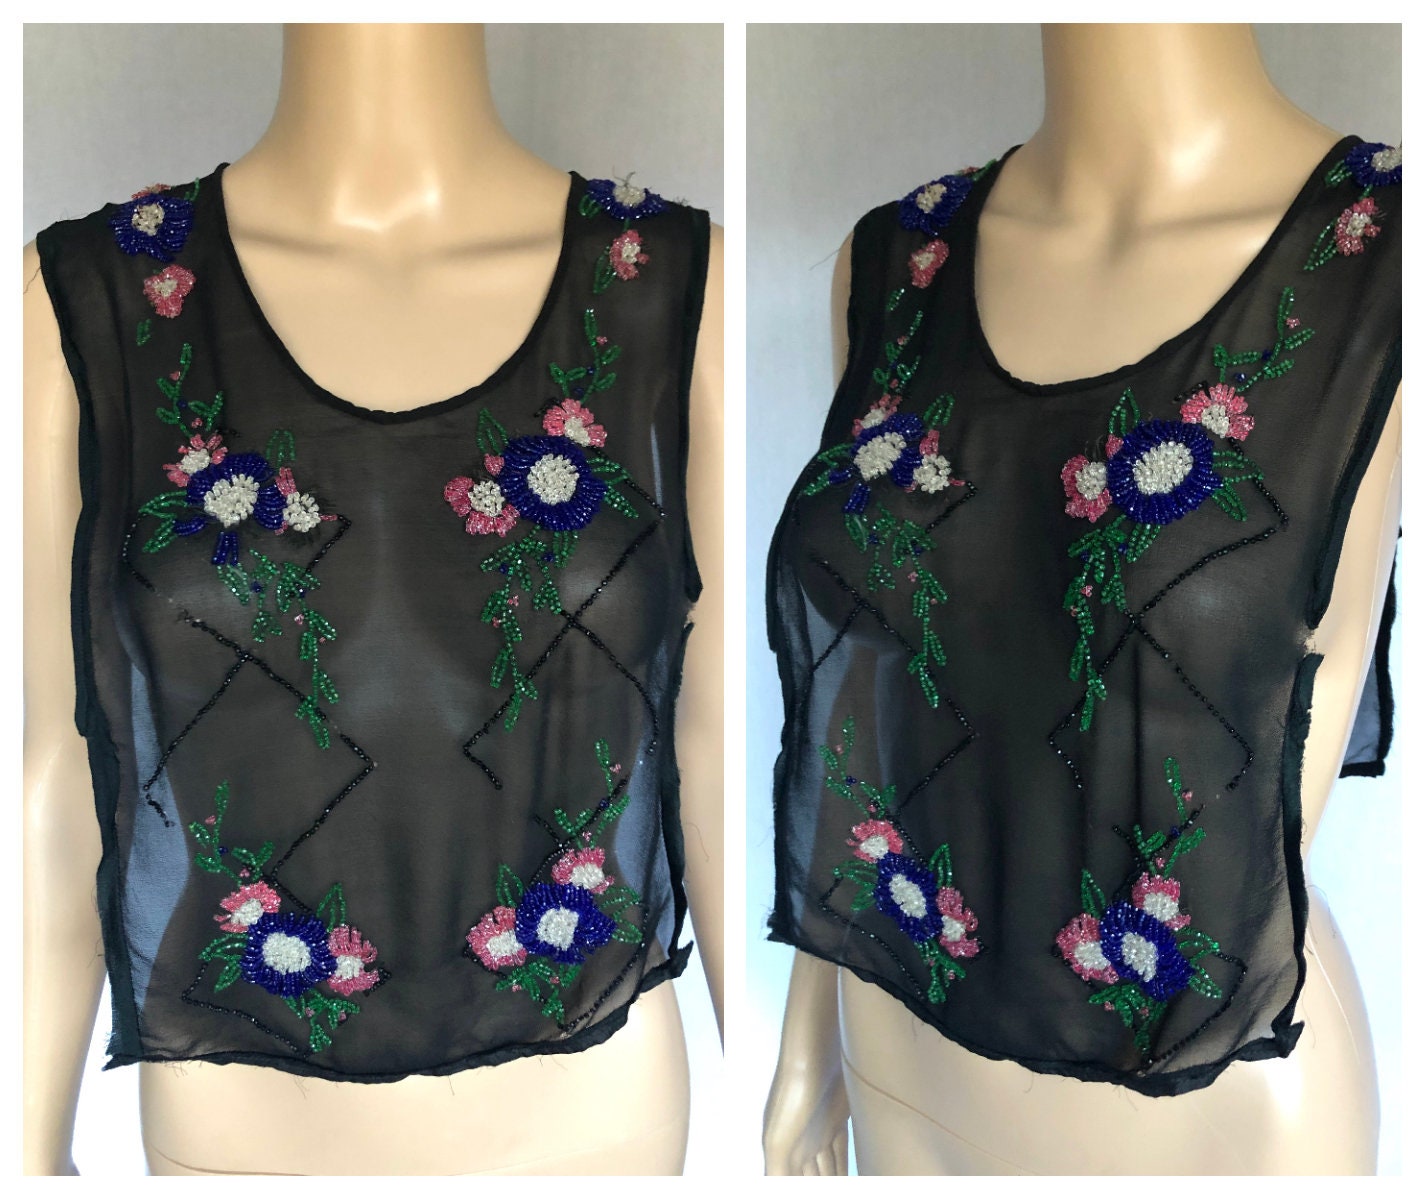 Real Vintage Search Engine Antique 1920s Floral Beaded Sheer DickeyVest Accessory - One Size Fits All $65.00 AT vintagedancer.com